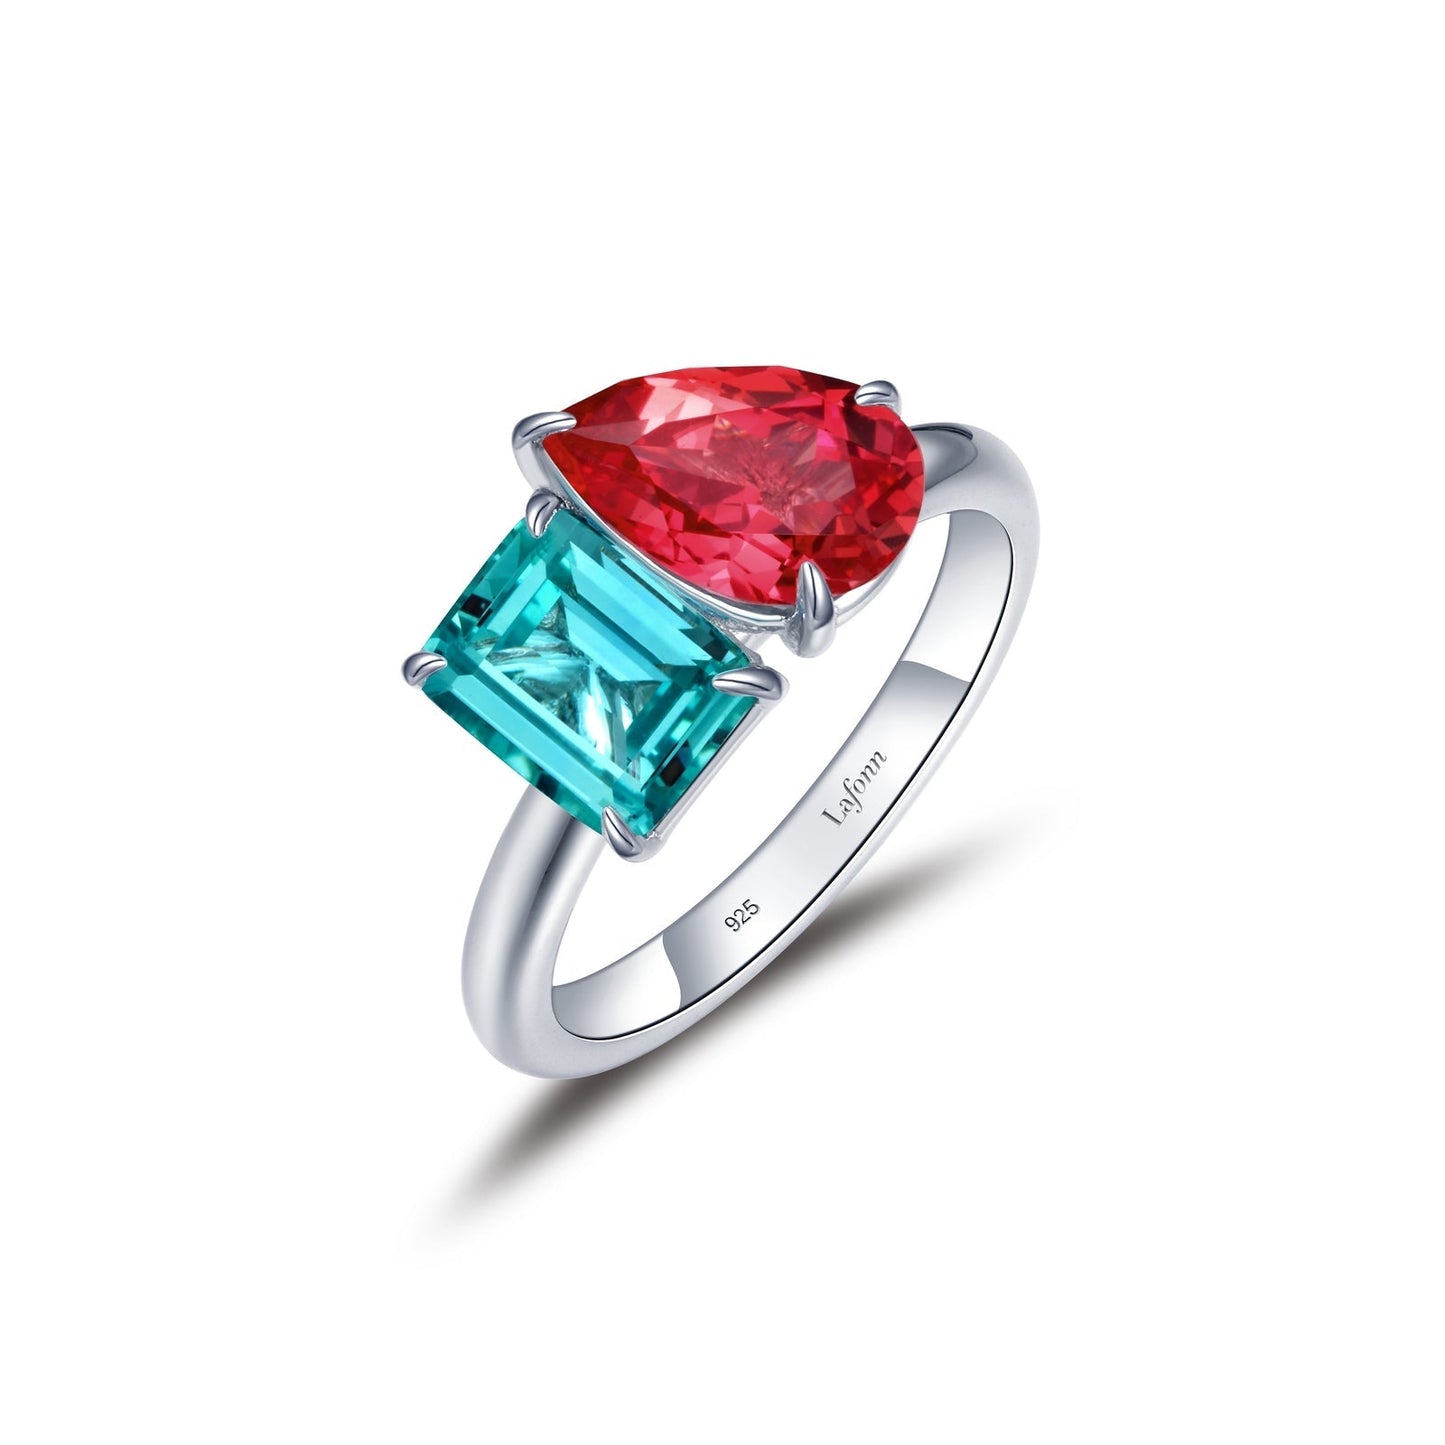 Load image into Gallery viewer, Lafonn Fancy Lab-Grown Sapphire Toi et Moi Ring RUBY/GREEN CORUNDUM RINGS Size 5 Platinum Appx CTW: 3.54 cts. CTS Approx. 10.0 mm (W)
